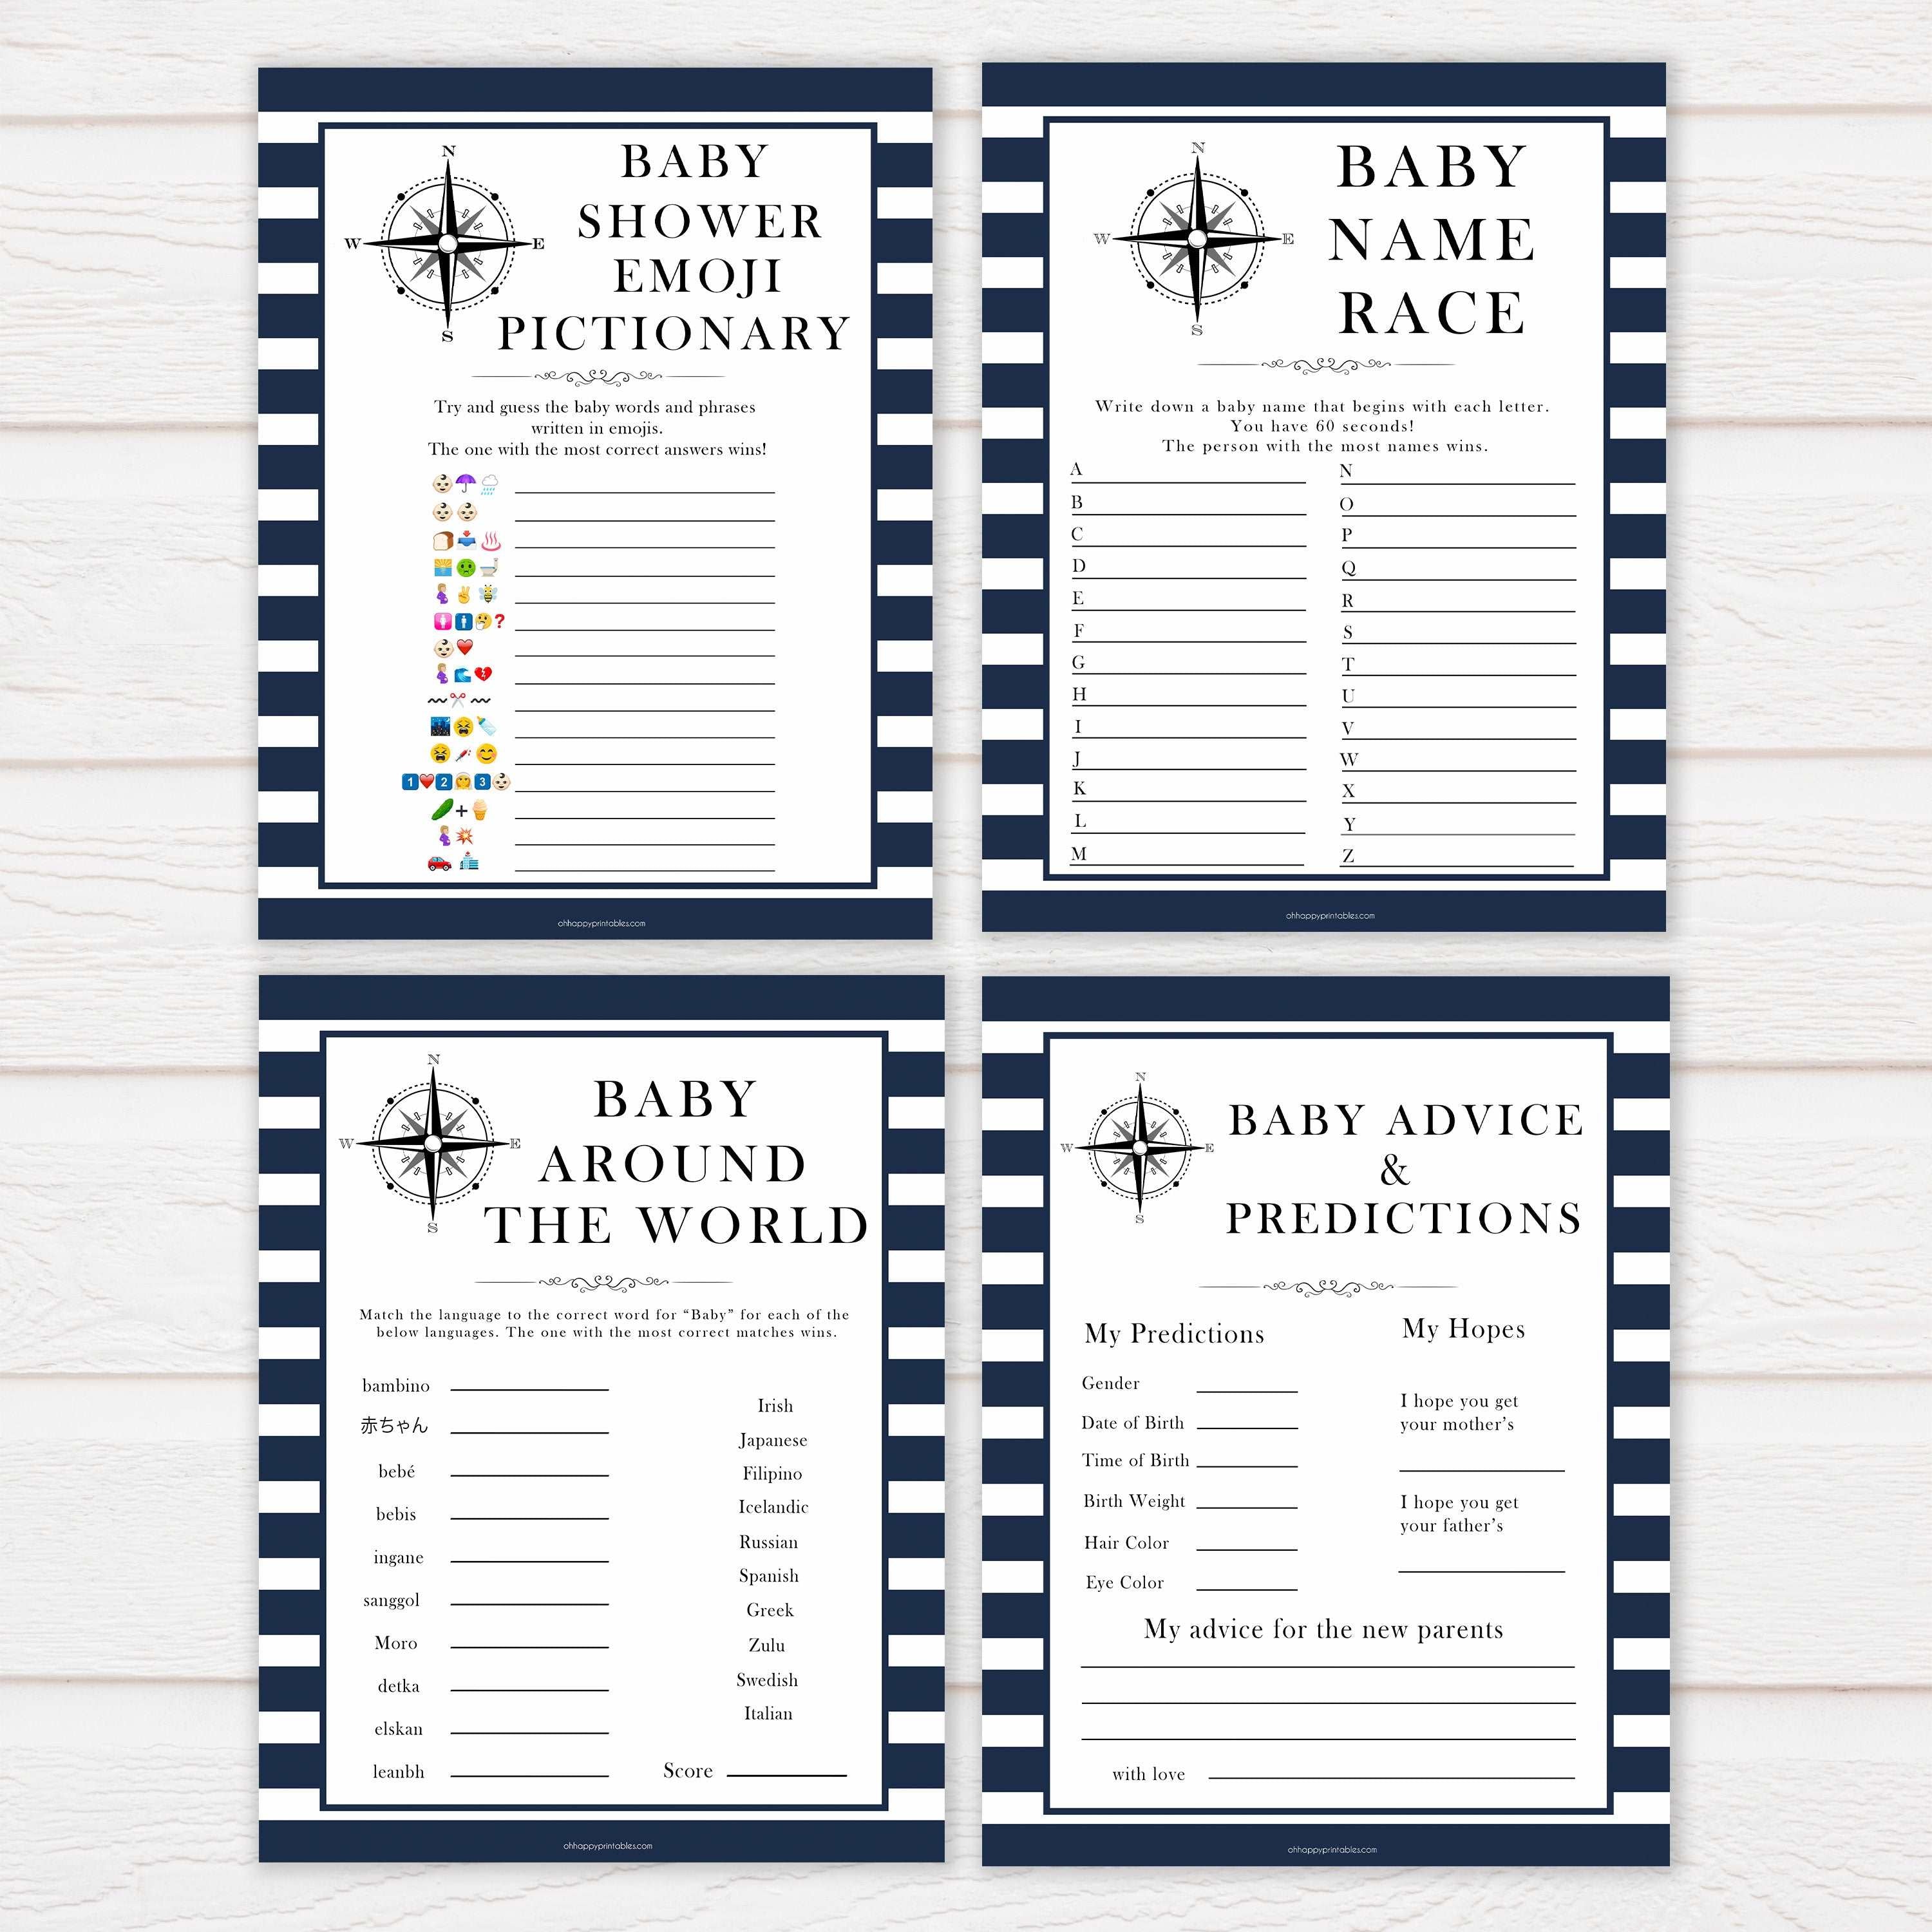 10 baby shower games, baby shower games bundles, Nautical baby shower games, baby shower games, printable baby shower games, baby shower games, fun baby games, ahoy its a boy, popular baby shower games, sailor baby games, boat baby game